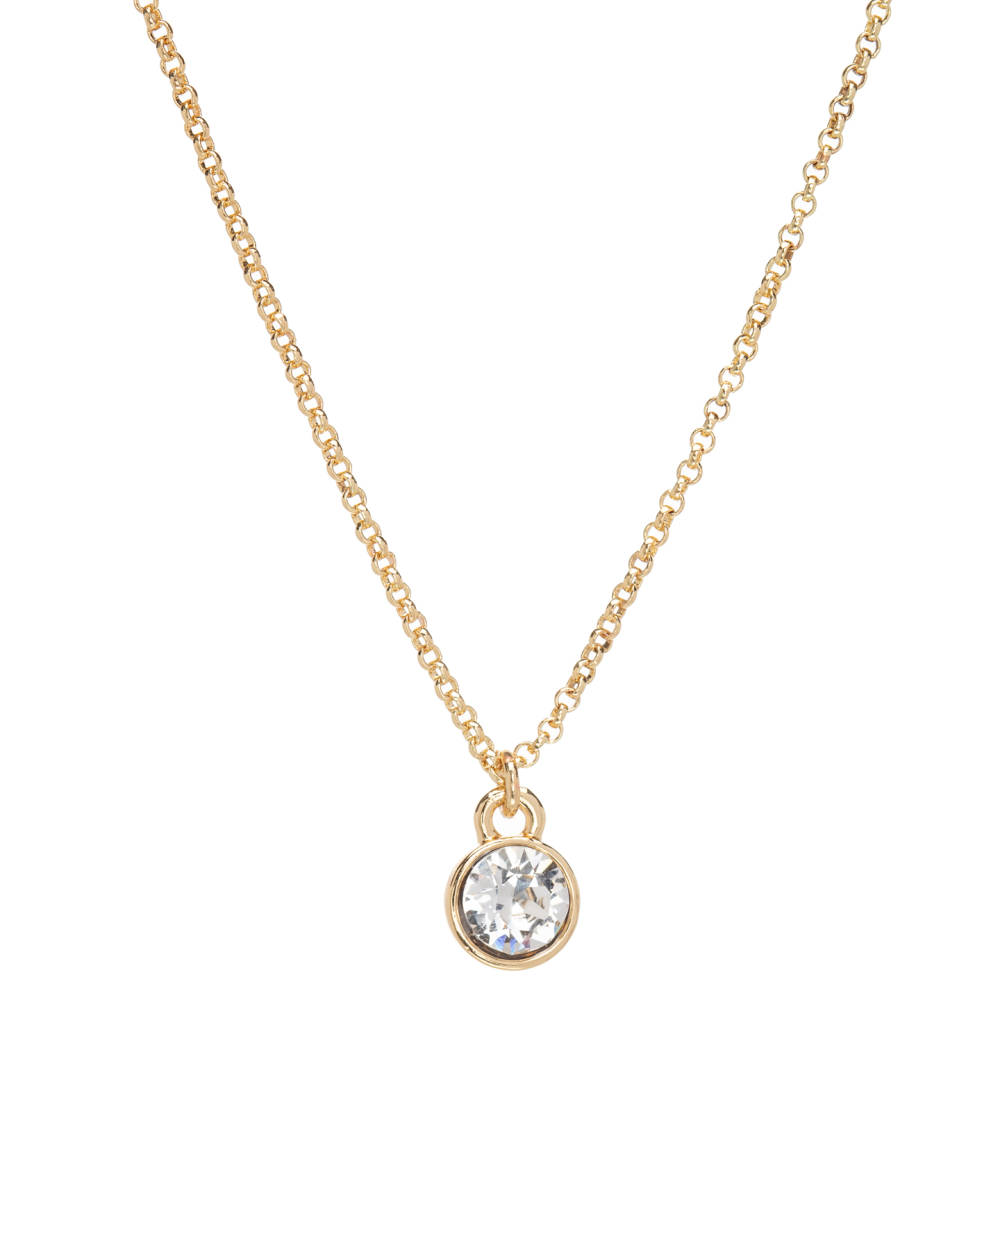 Goldtone crystal Solitaire Pendant Necklace made with Quality Austrian Crystals - MICALLA